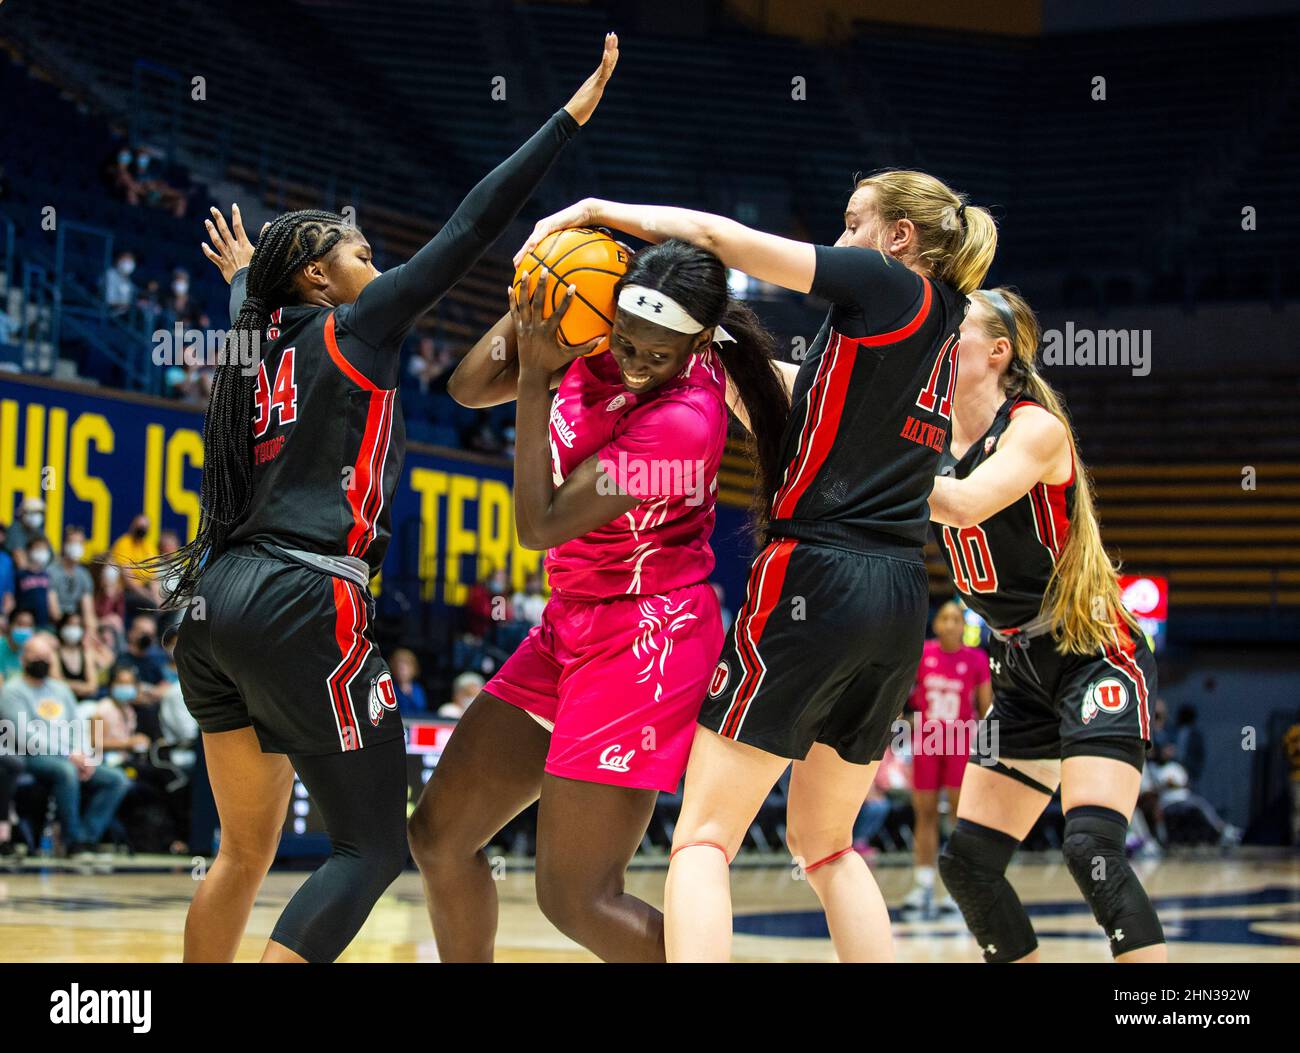 Berkeley, CA U.S. 13th Feb, 2022. A. California forward Ugonne Onyiah (0) battles for the rebound during the NCAA Women's Basketball game between Utah Utes and the California Golden Bears. Utah beat California in overtime 80-75 at Hass Pavilion Berkeley Calif. Thurman James/CSM/Alamy Live News Stock Photo